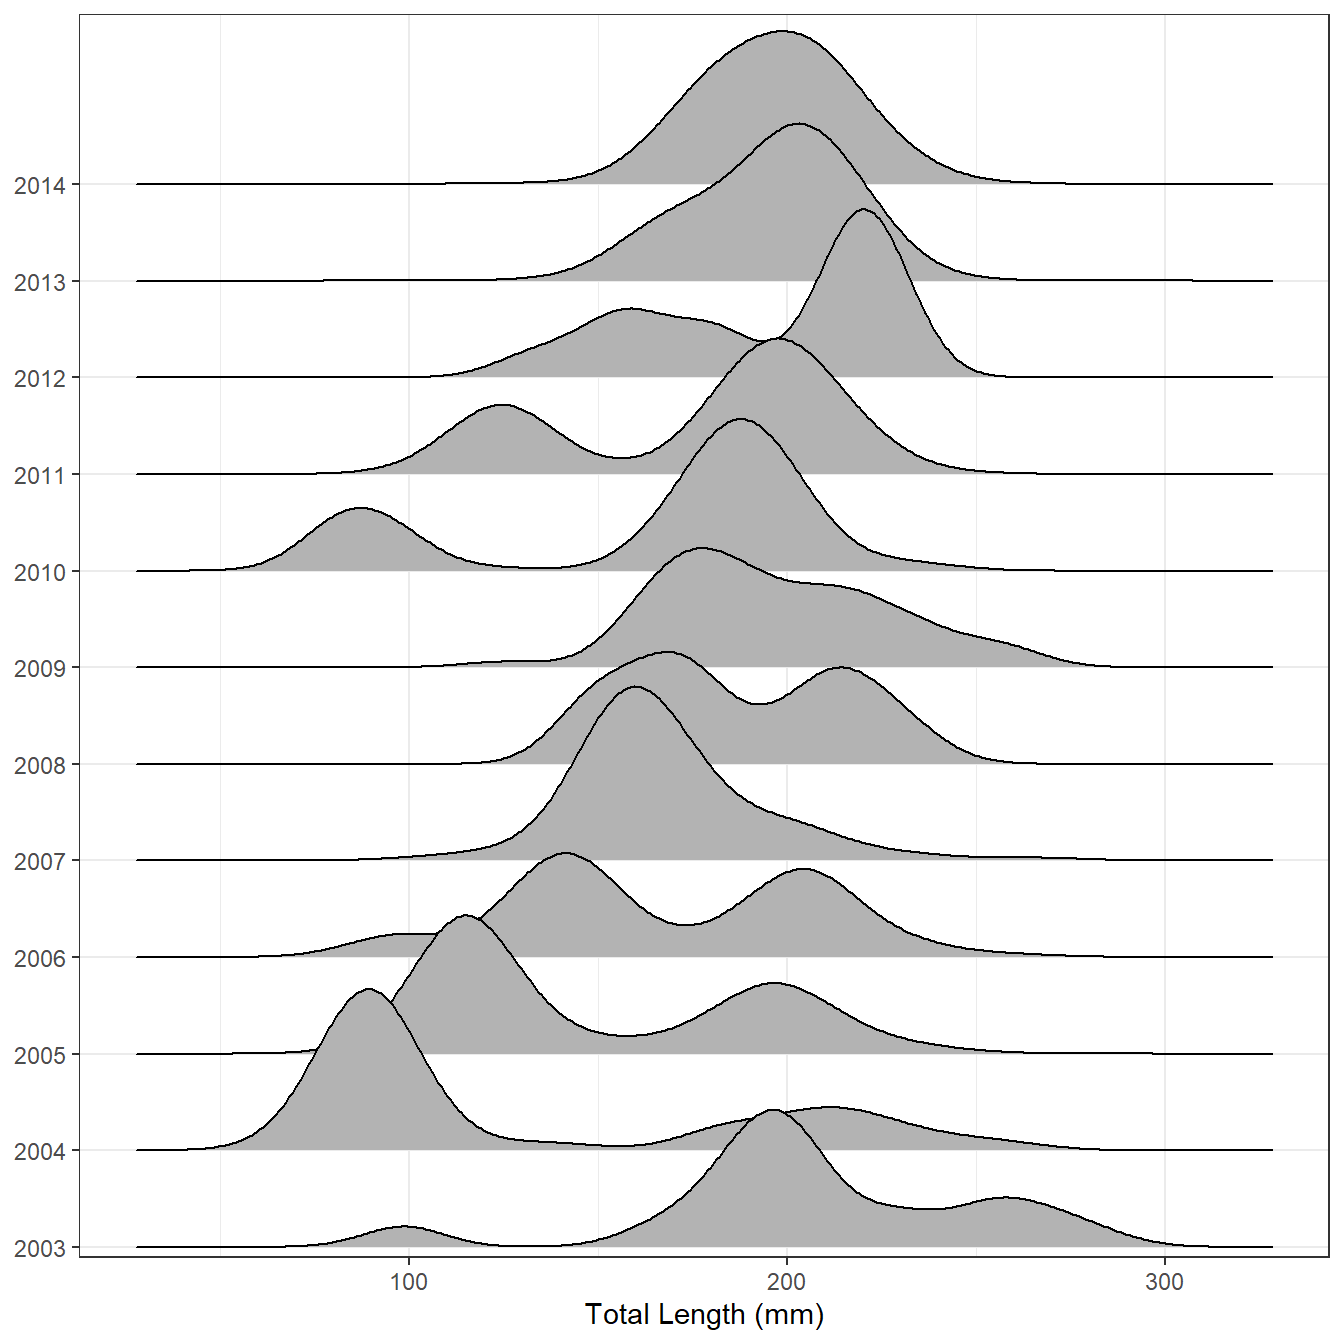 Ridgelinle plot of the total lengths of Lake Superior Kiyi from 2003 to 2014.